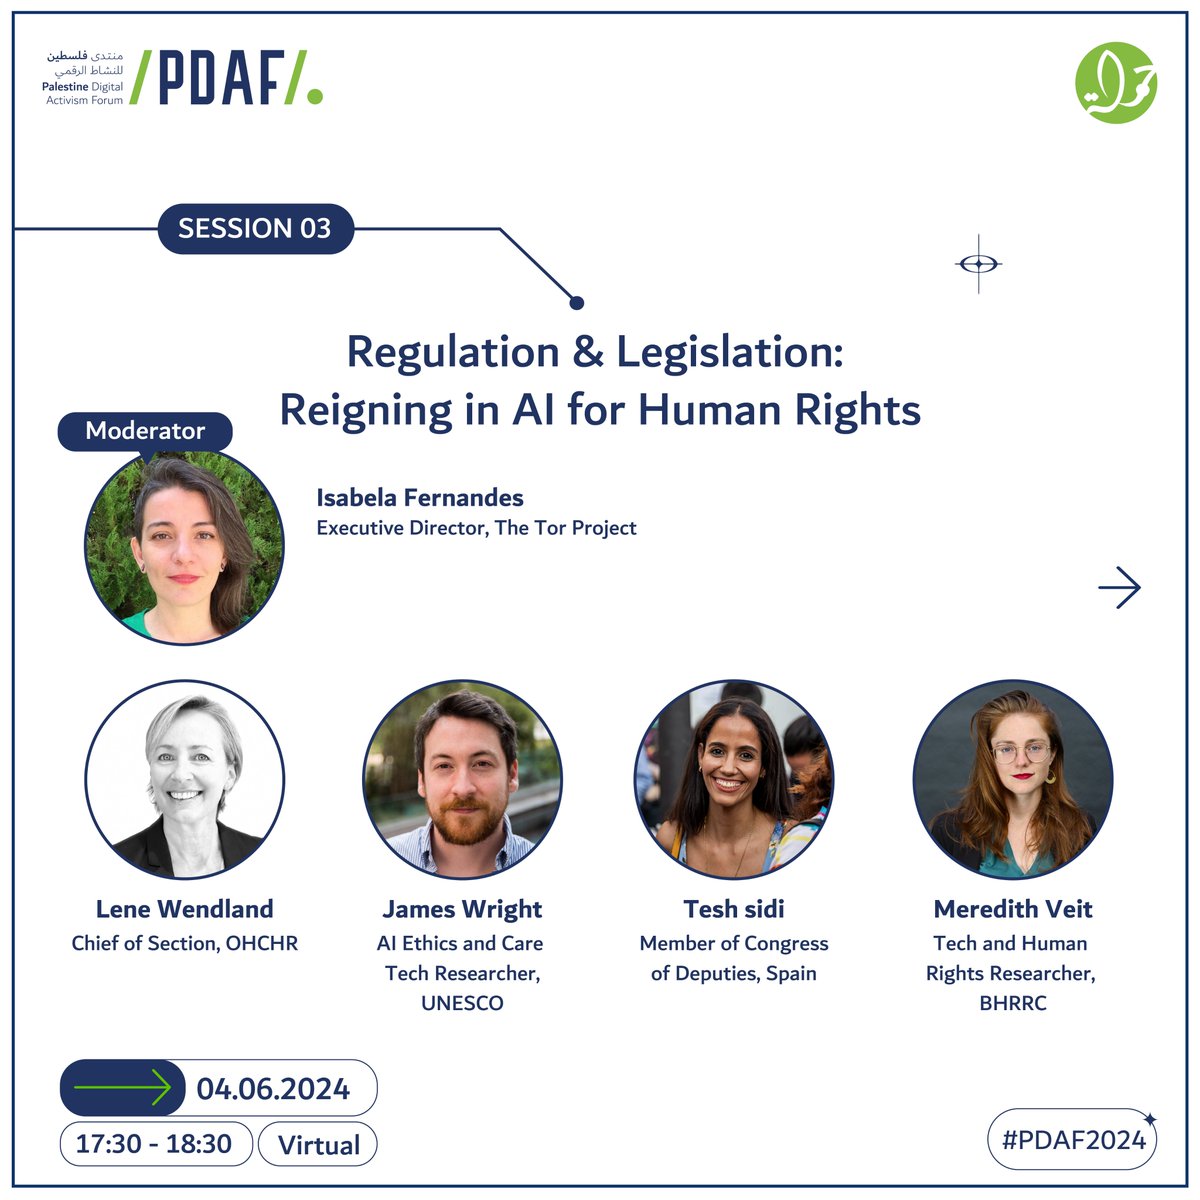 📢On the first day of PDAF 2024, join us for the third session “Regulation & Legislation: Reigning in AI for Human Rights” Reserve your seat now: pdaf.net #PDAF2024 @teshsidi @jms_wright @torproject